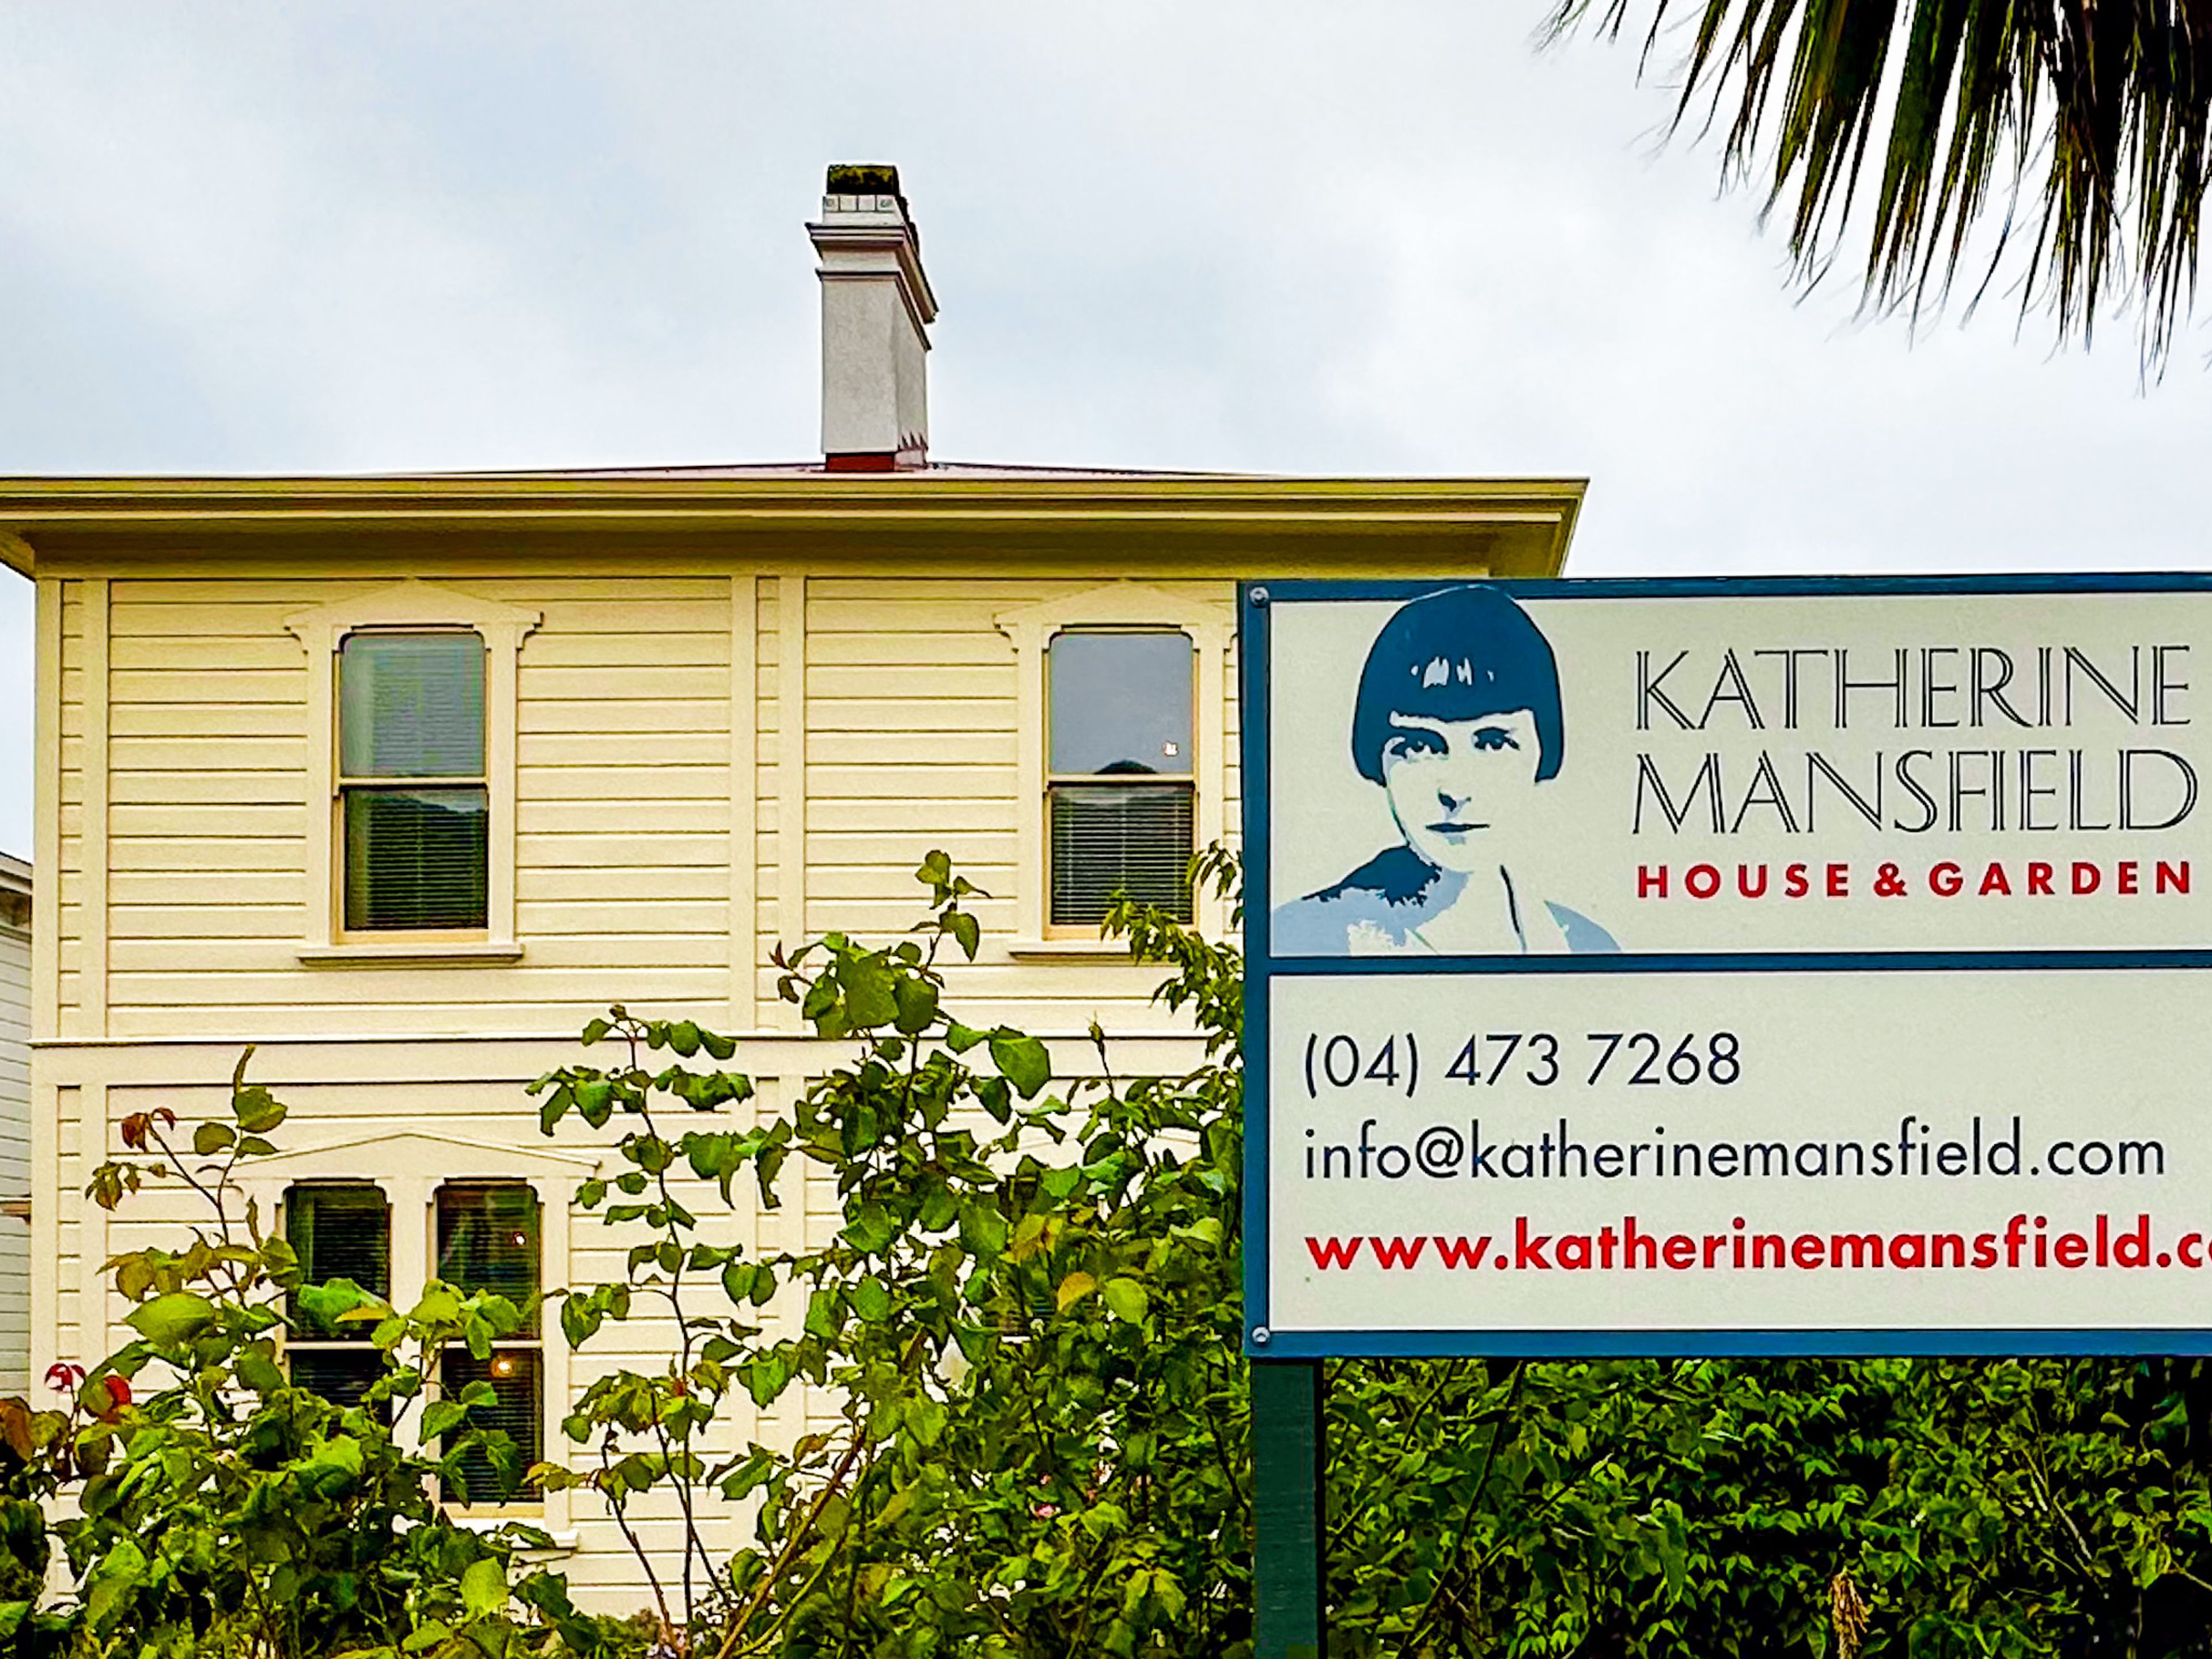 portrait of katheirne mansfield on the sign in front of the house